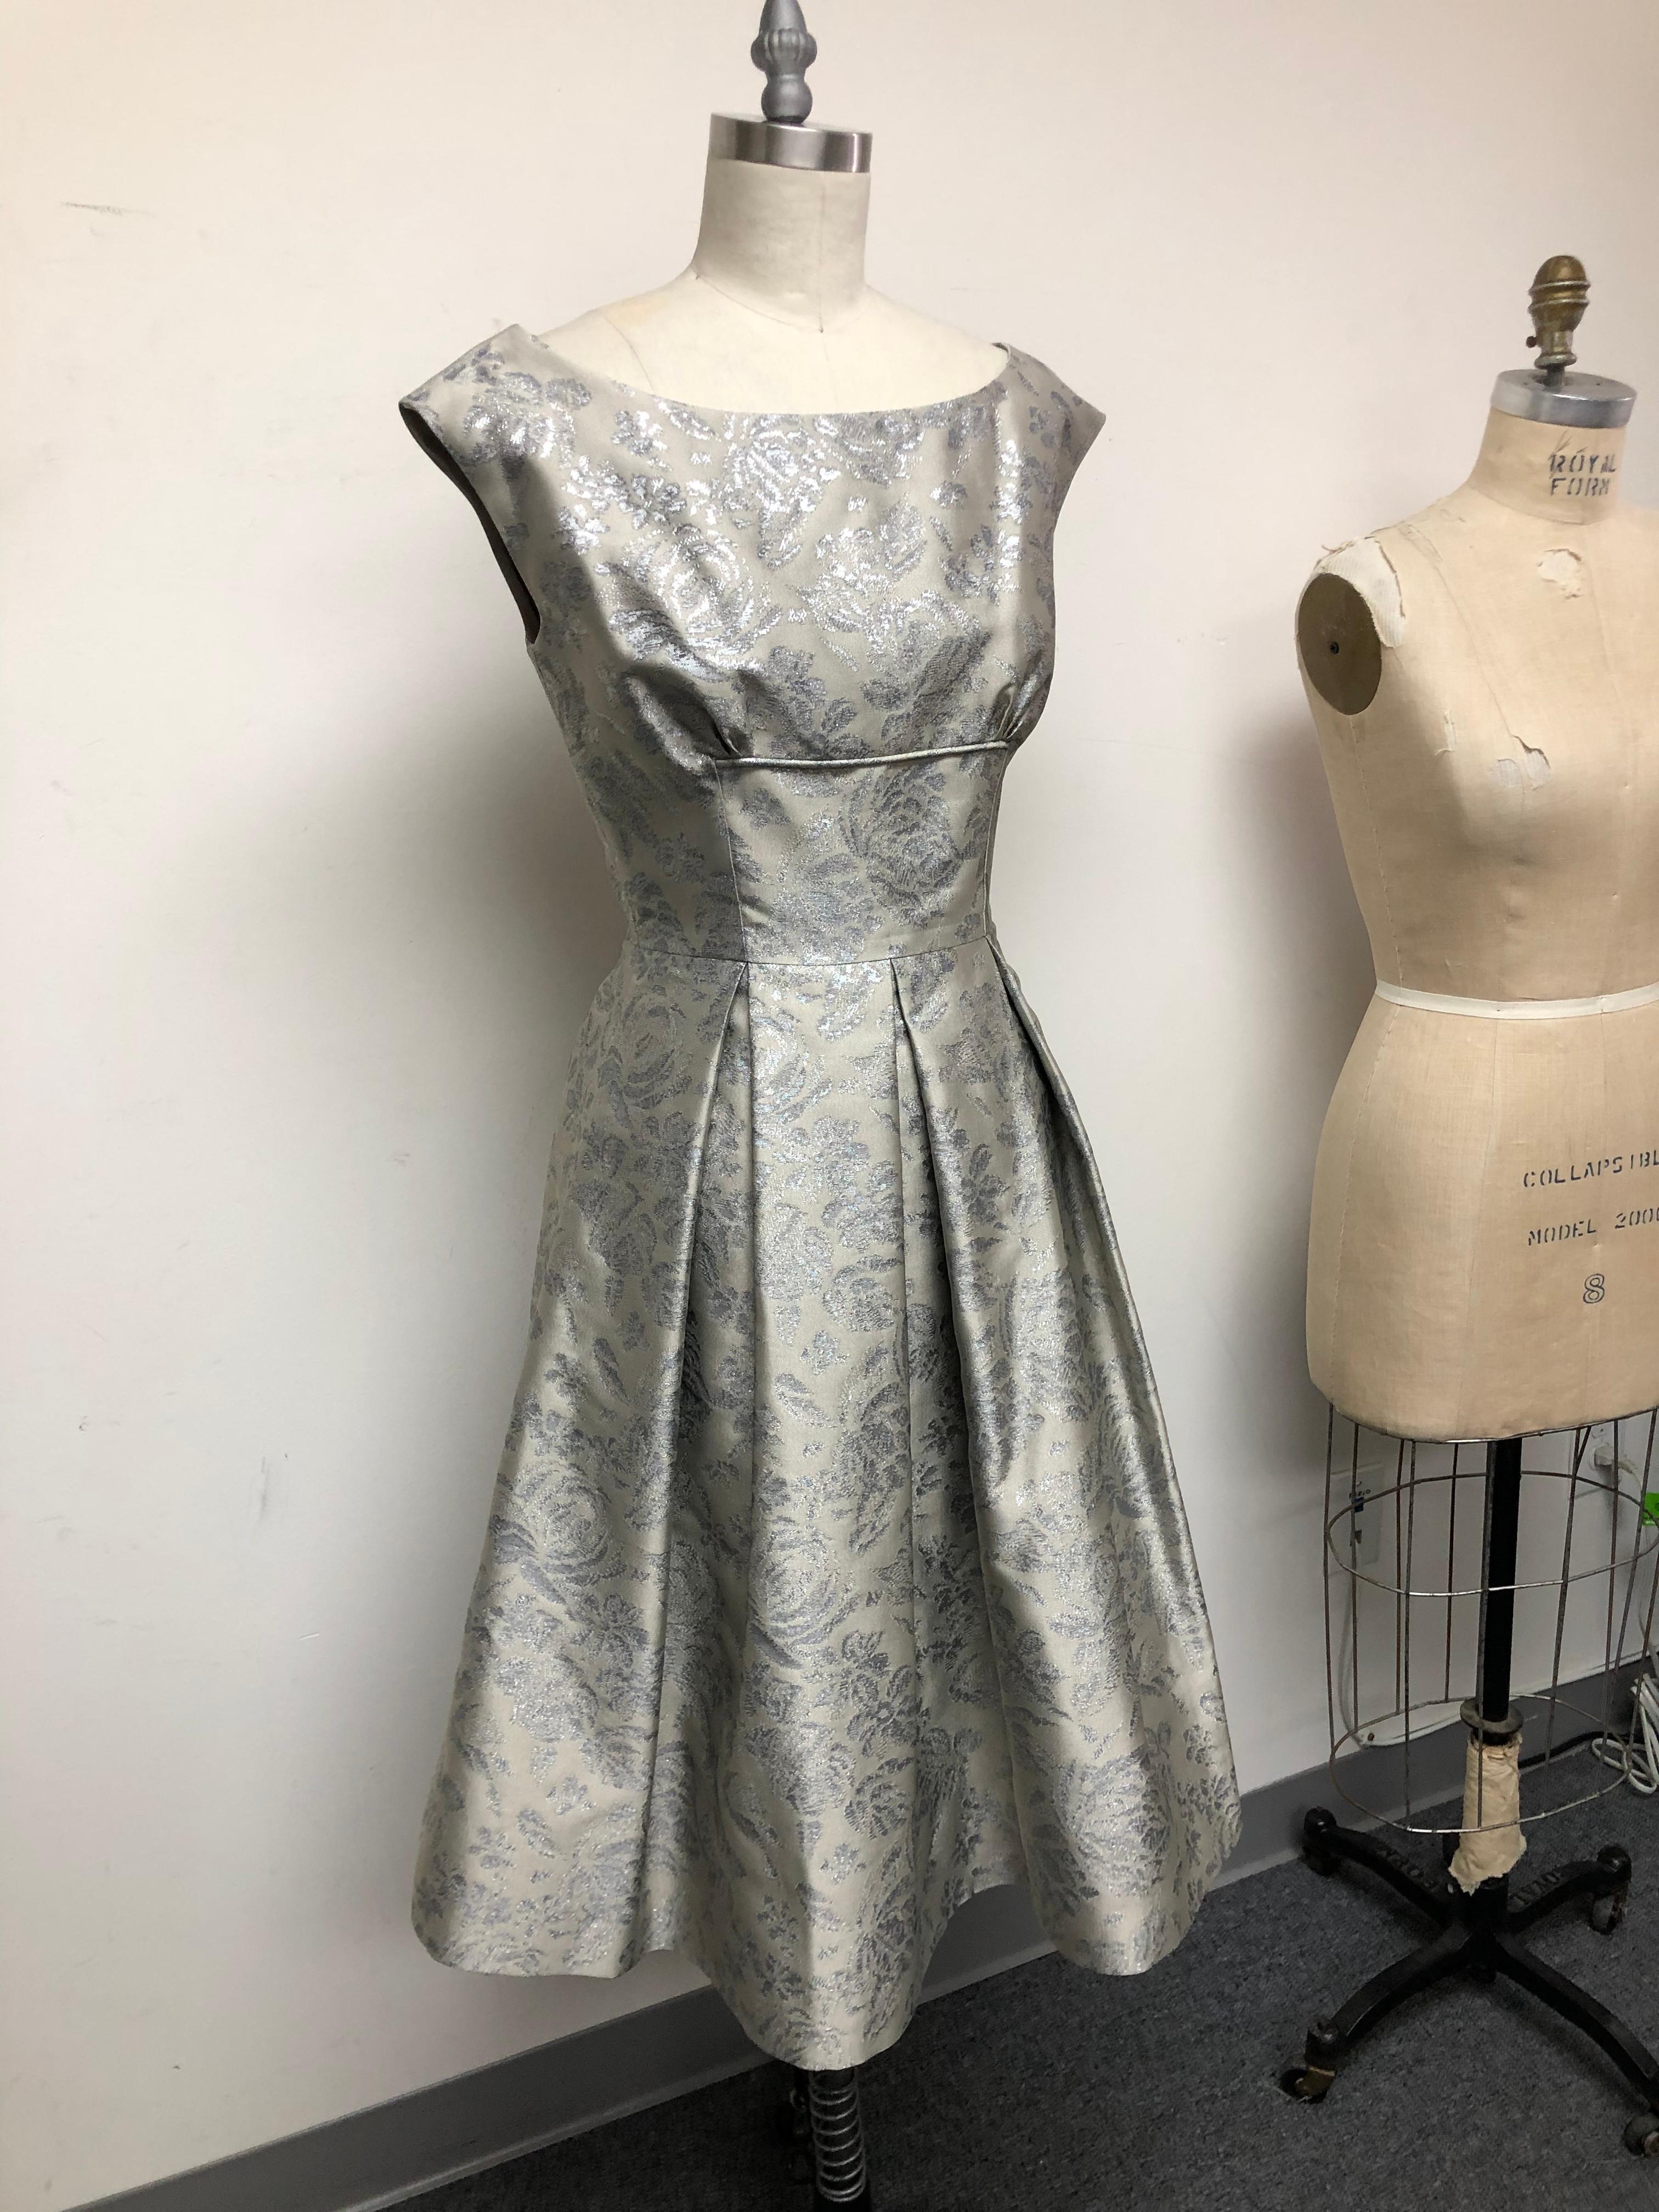 Fit and Flare French Brocade in Beige and  Sparkling Silver abstract floral is perfect for Spring into Summer. Wear this dress to weddings and parties and you will see how it shines. The dress is 
both timeless and chic. The lovely neckline and